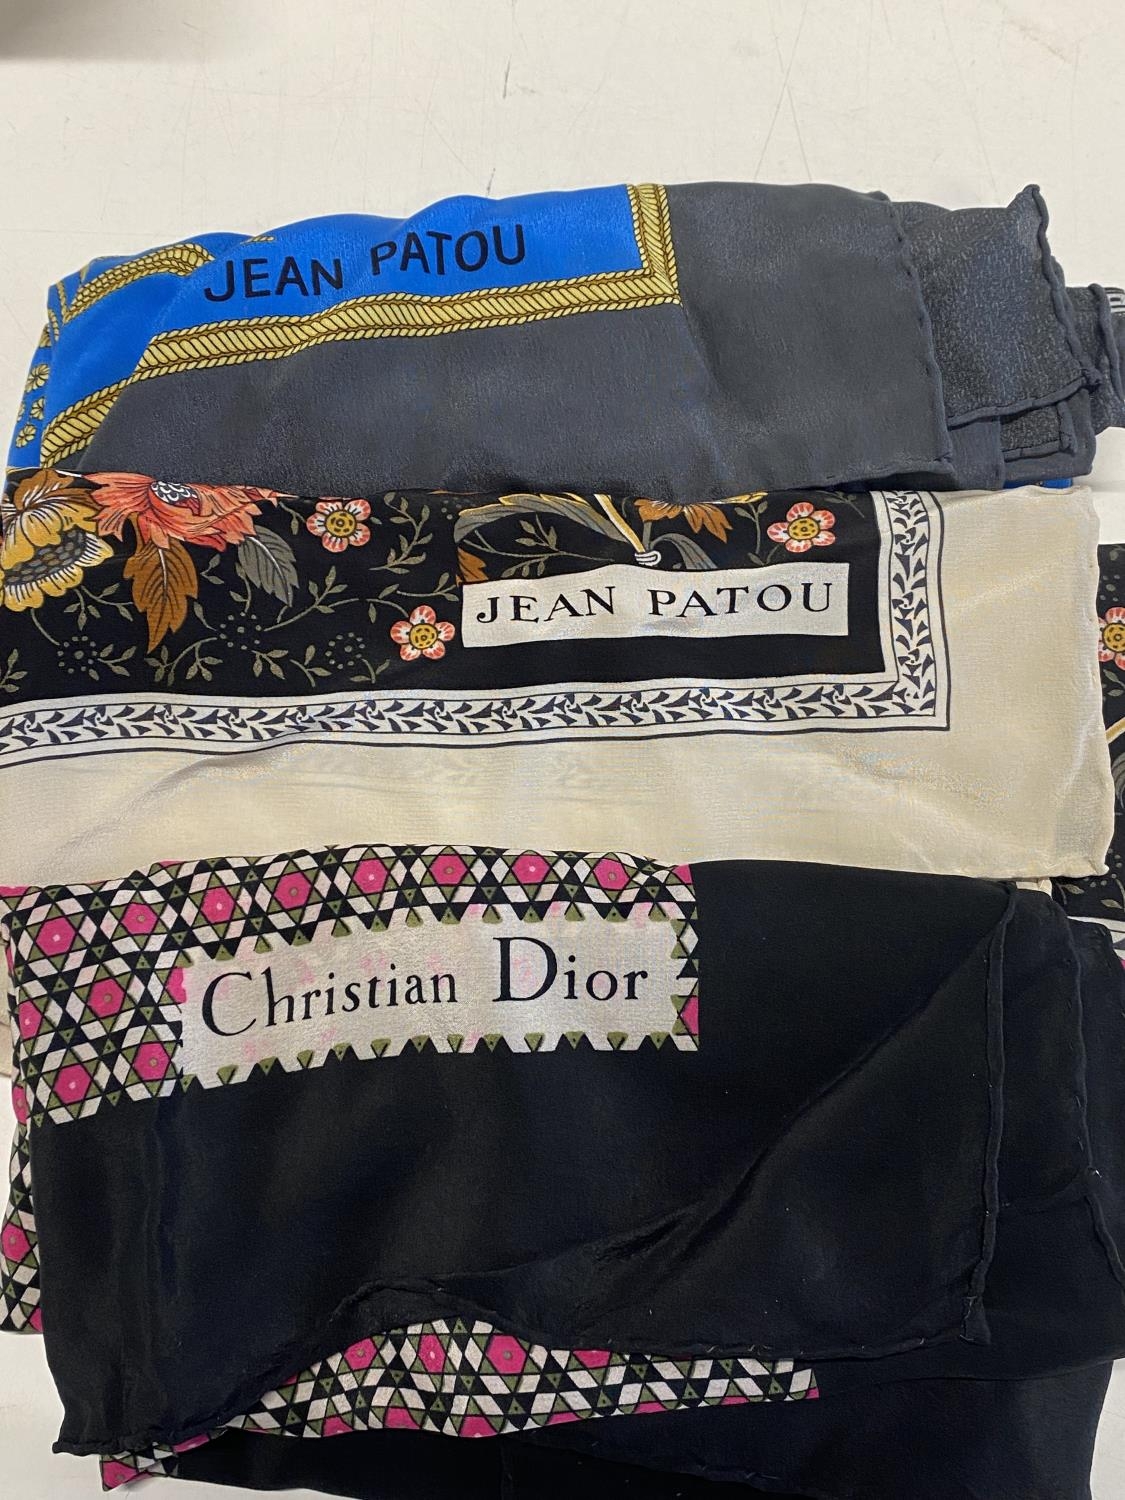 Three scarves John Patou and Christian Dior - Image 2 of 2